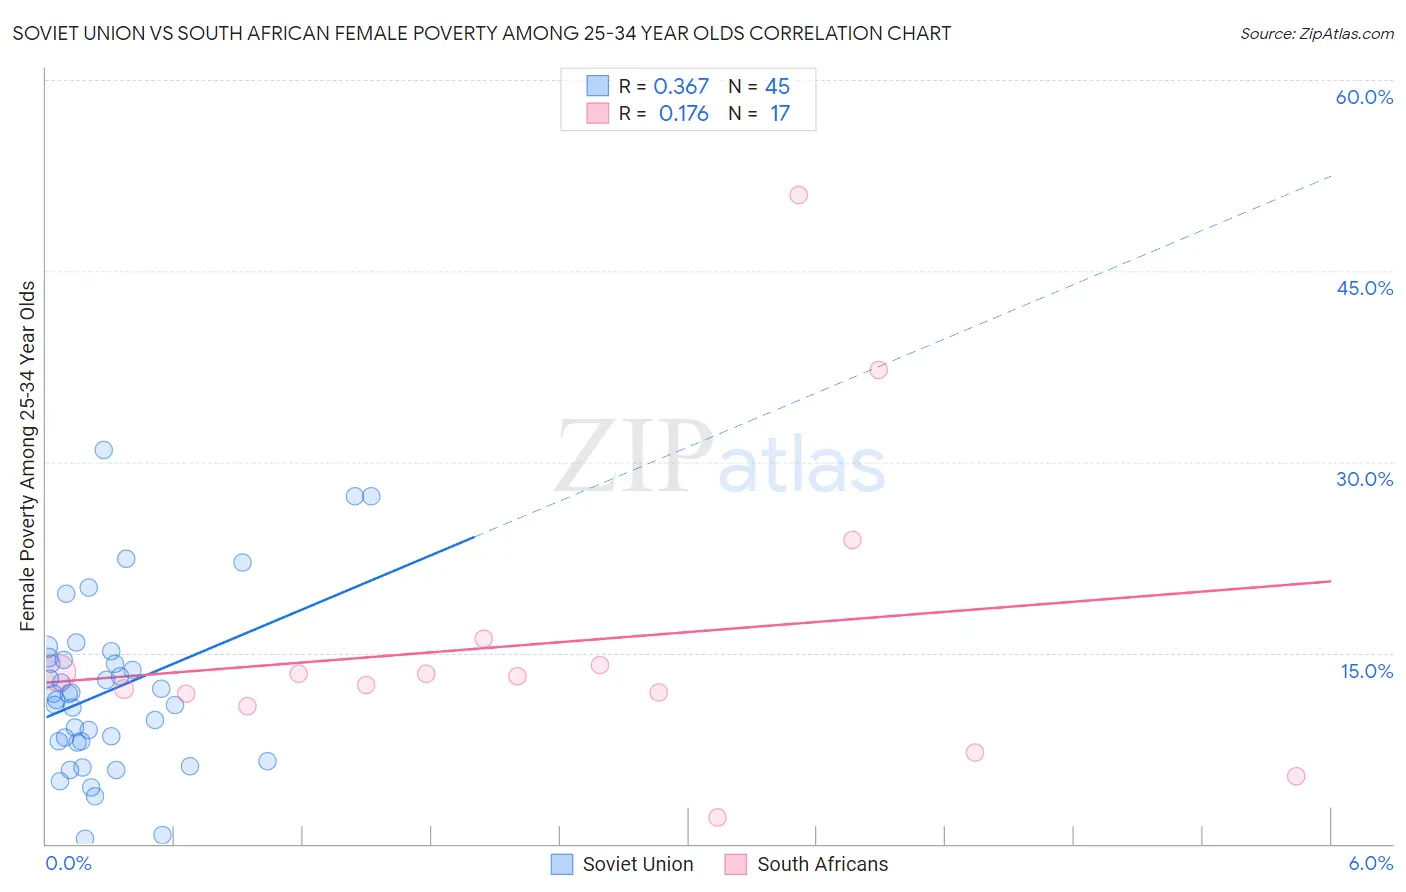 Soviet Union vs South African Female Poverty Among 25-34 Year Olds